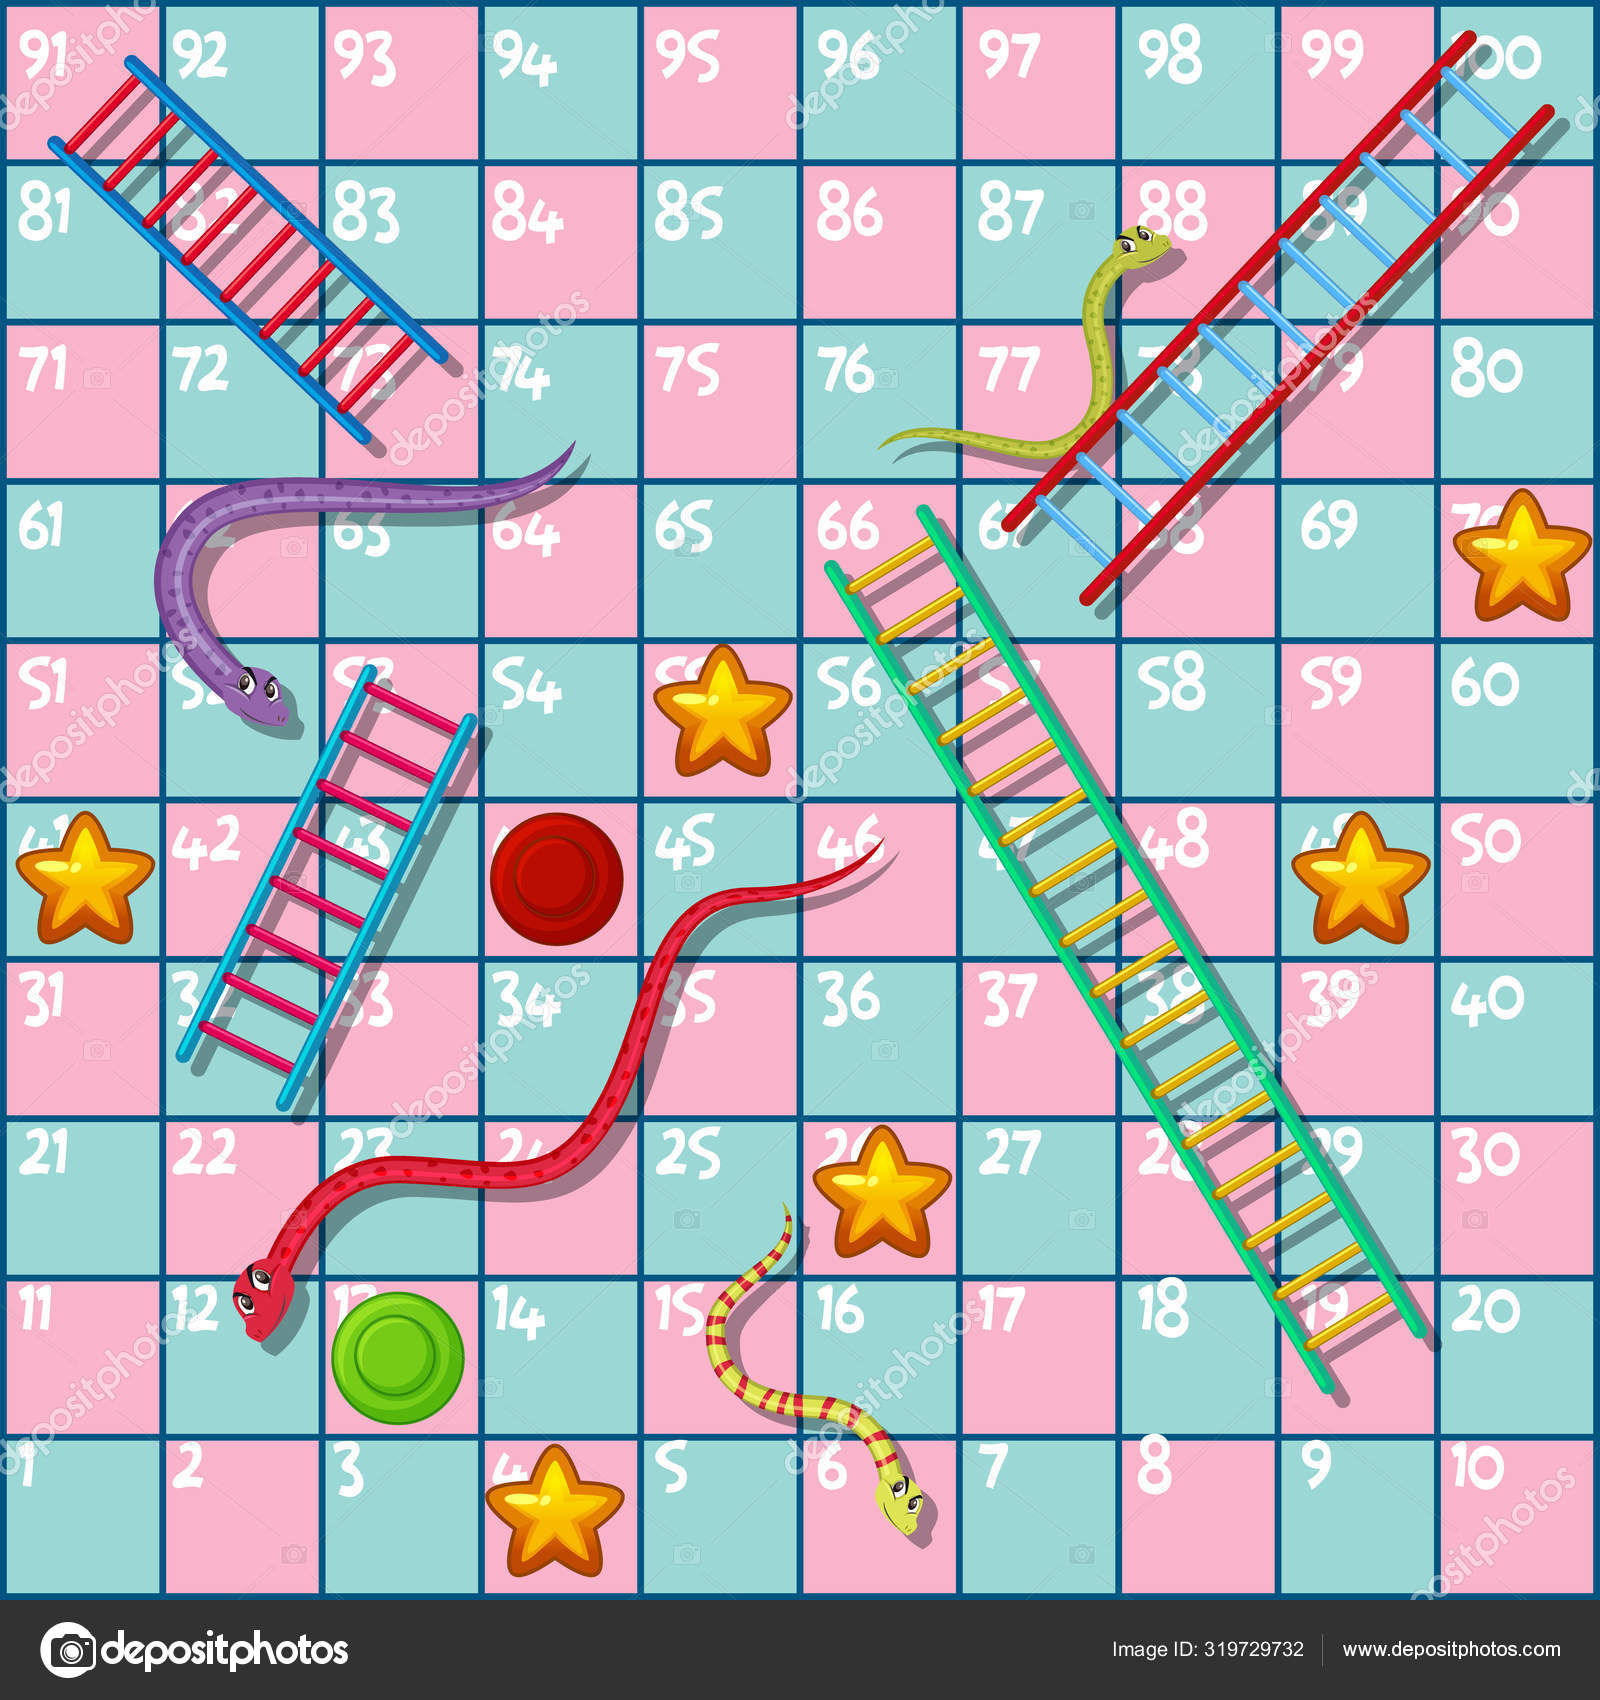 snakes and ladders template free download